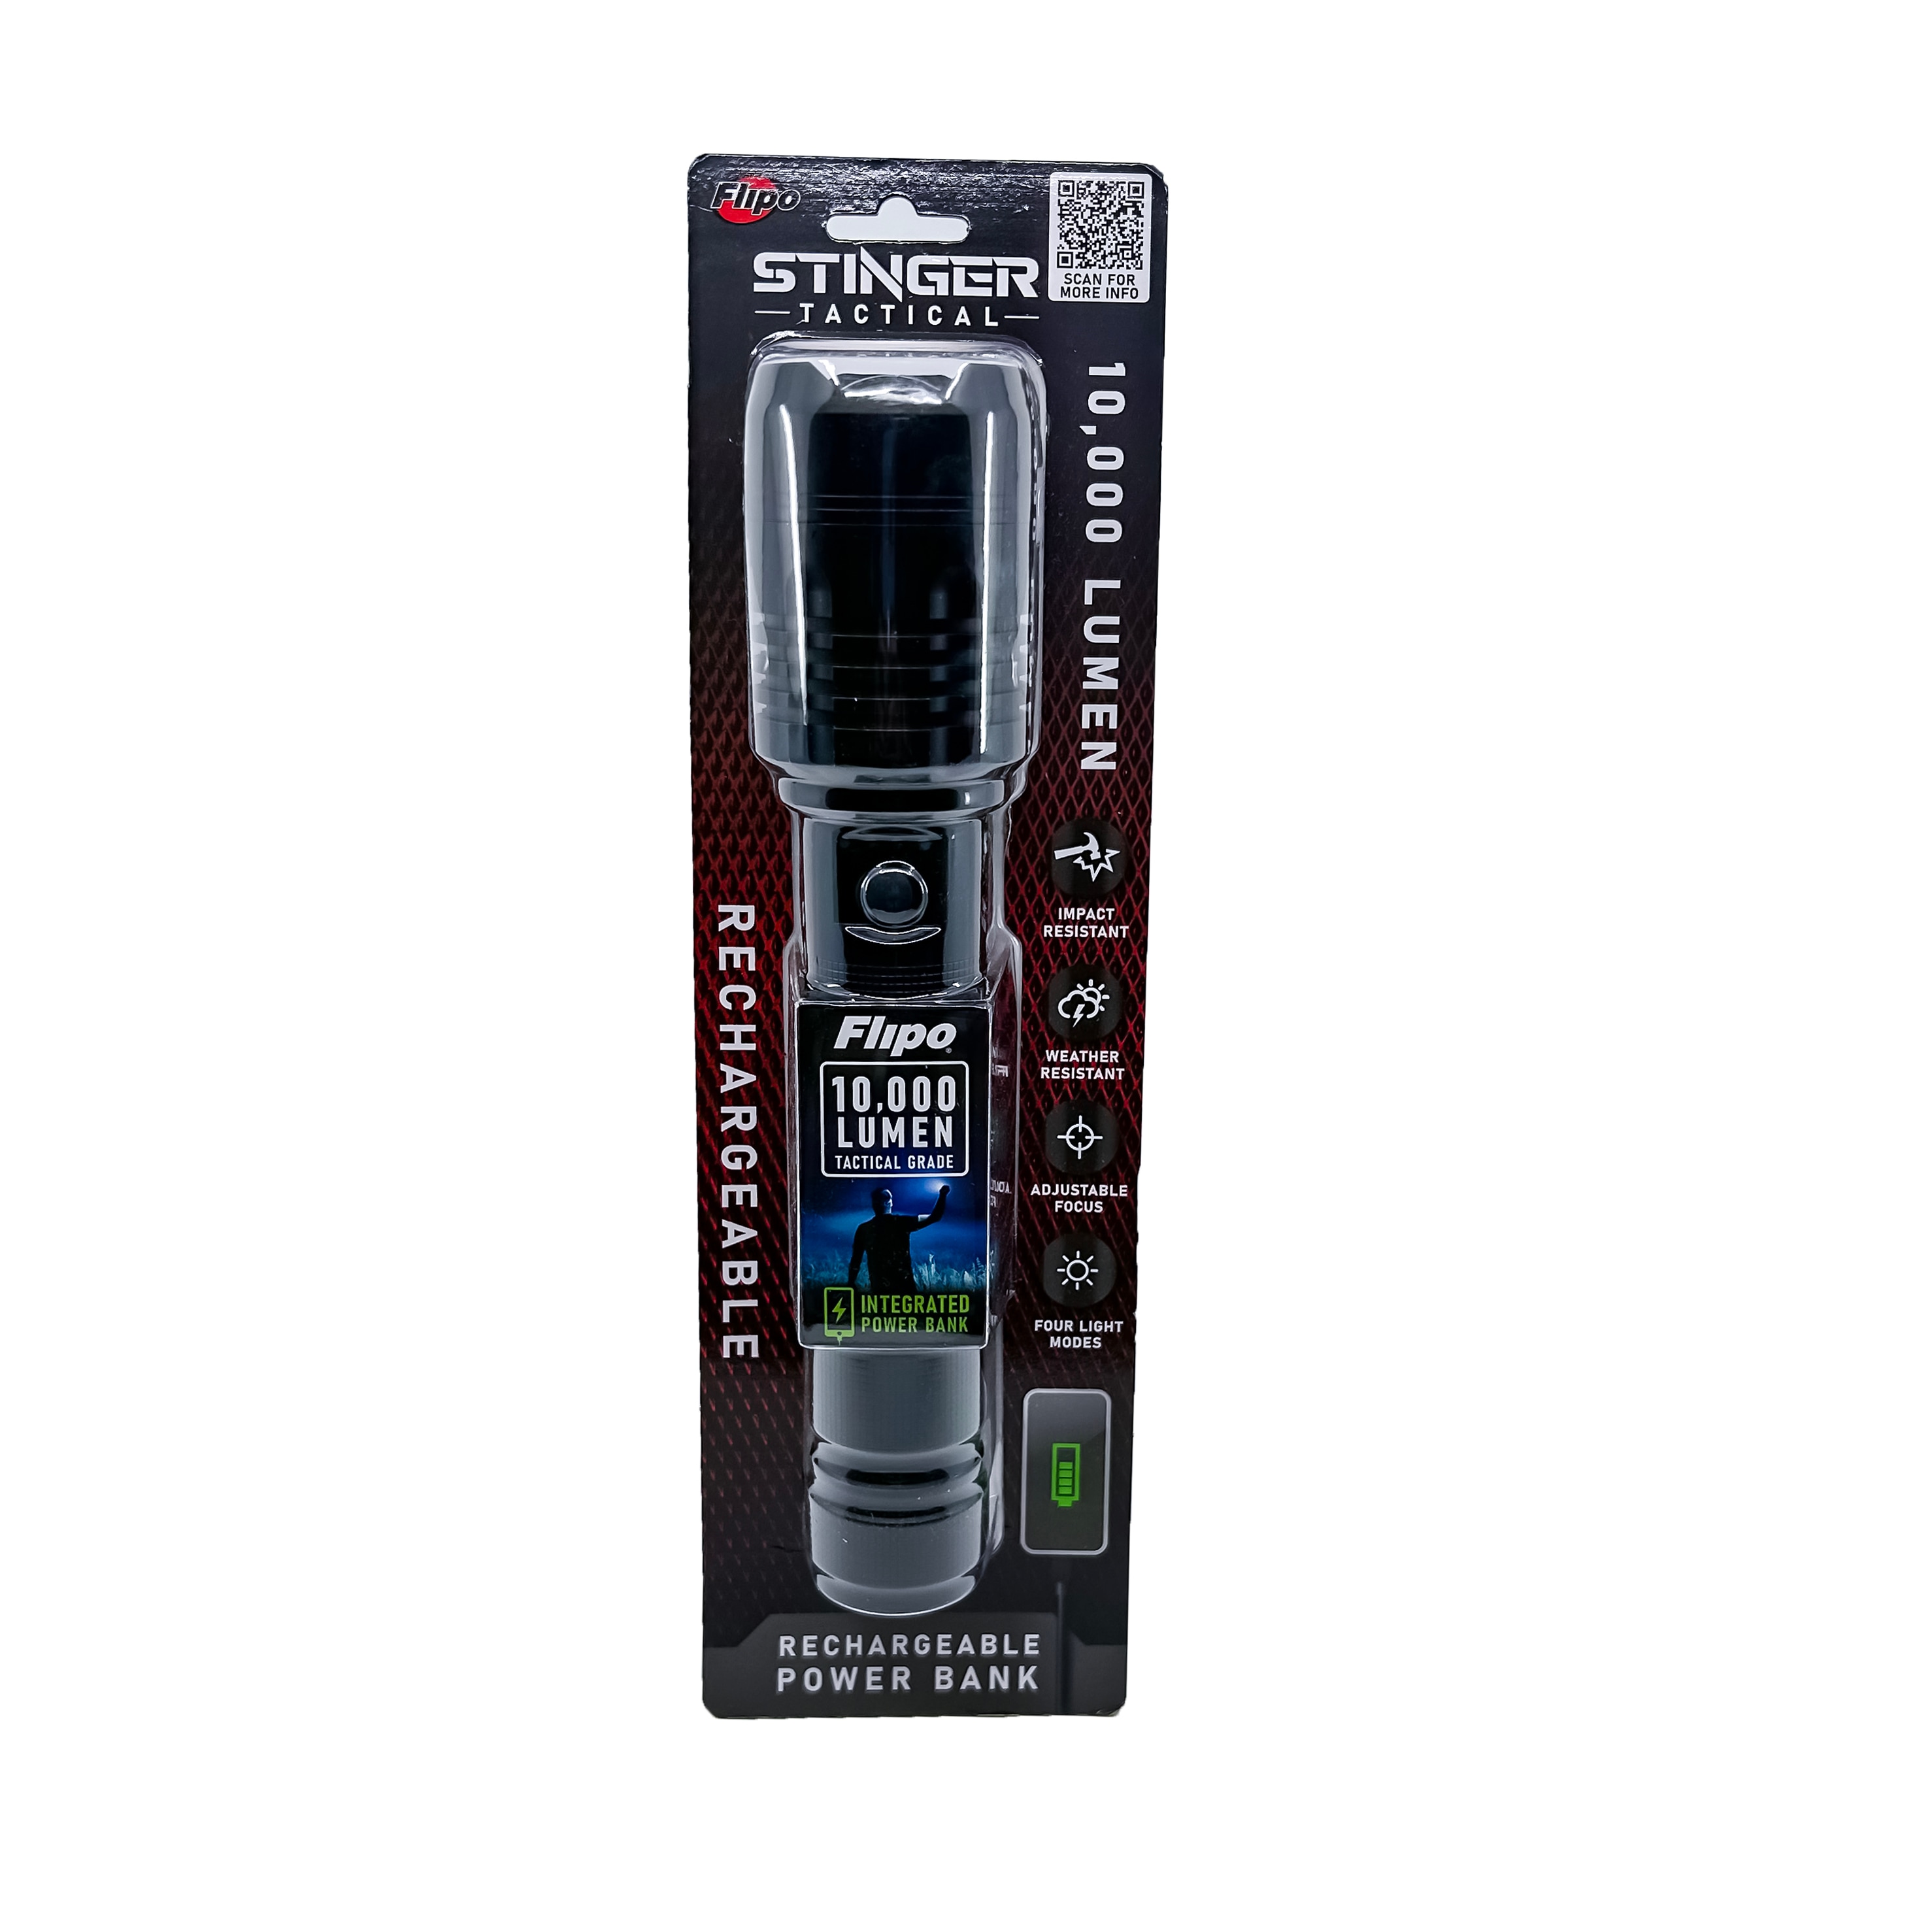 Rechargeable LED Flashlight High Lumen Battery Powered - Powerful 220,000